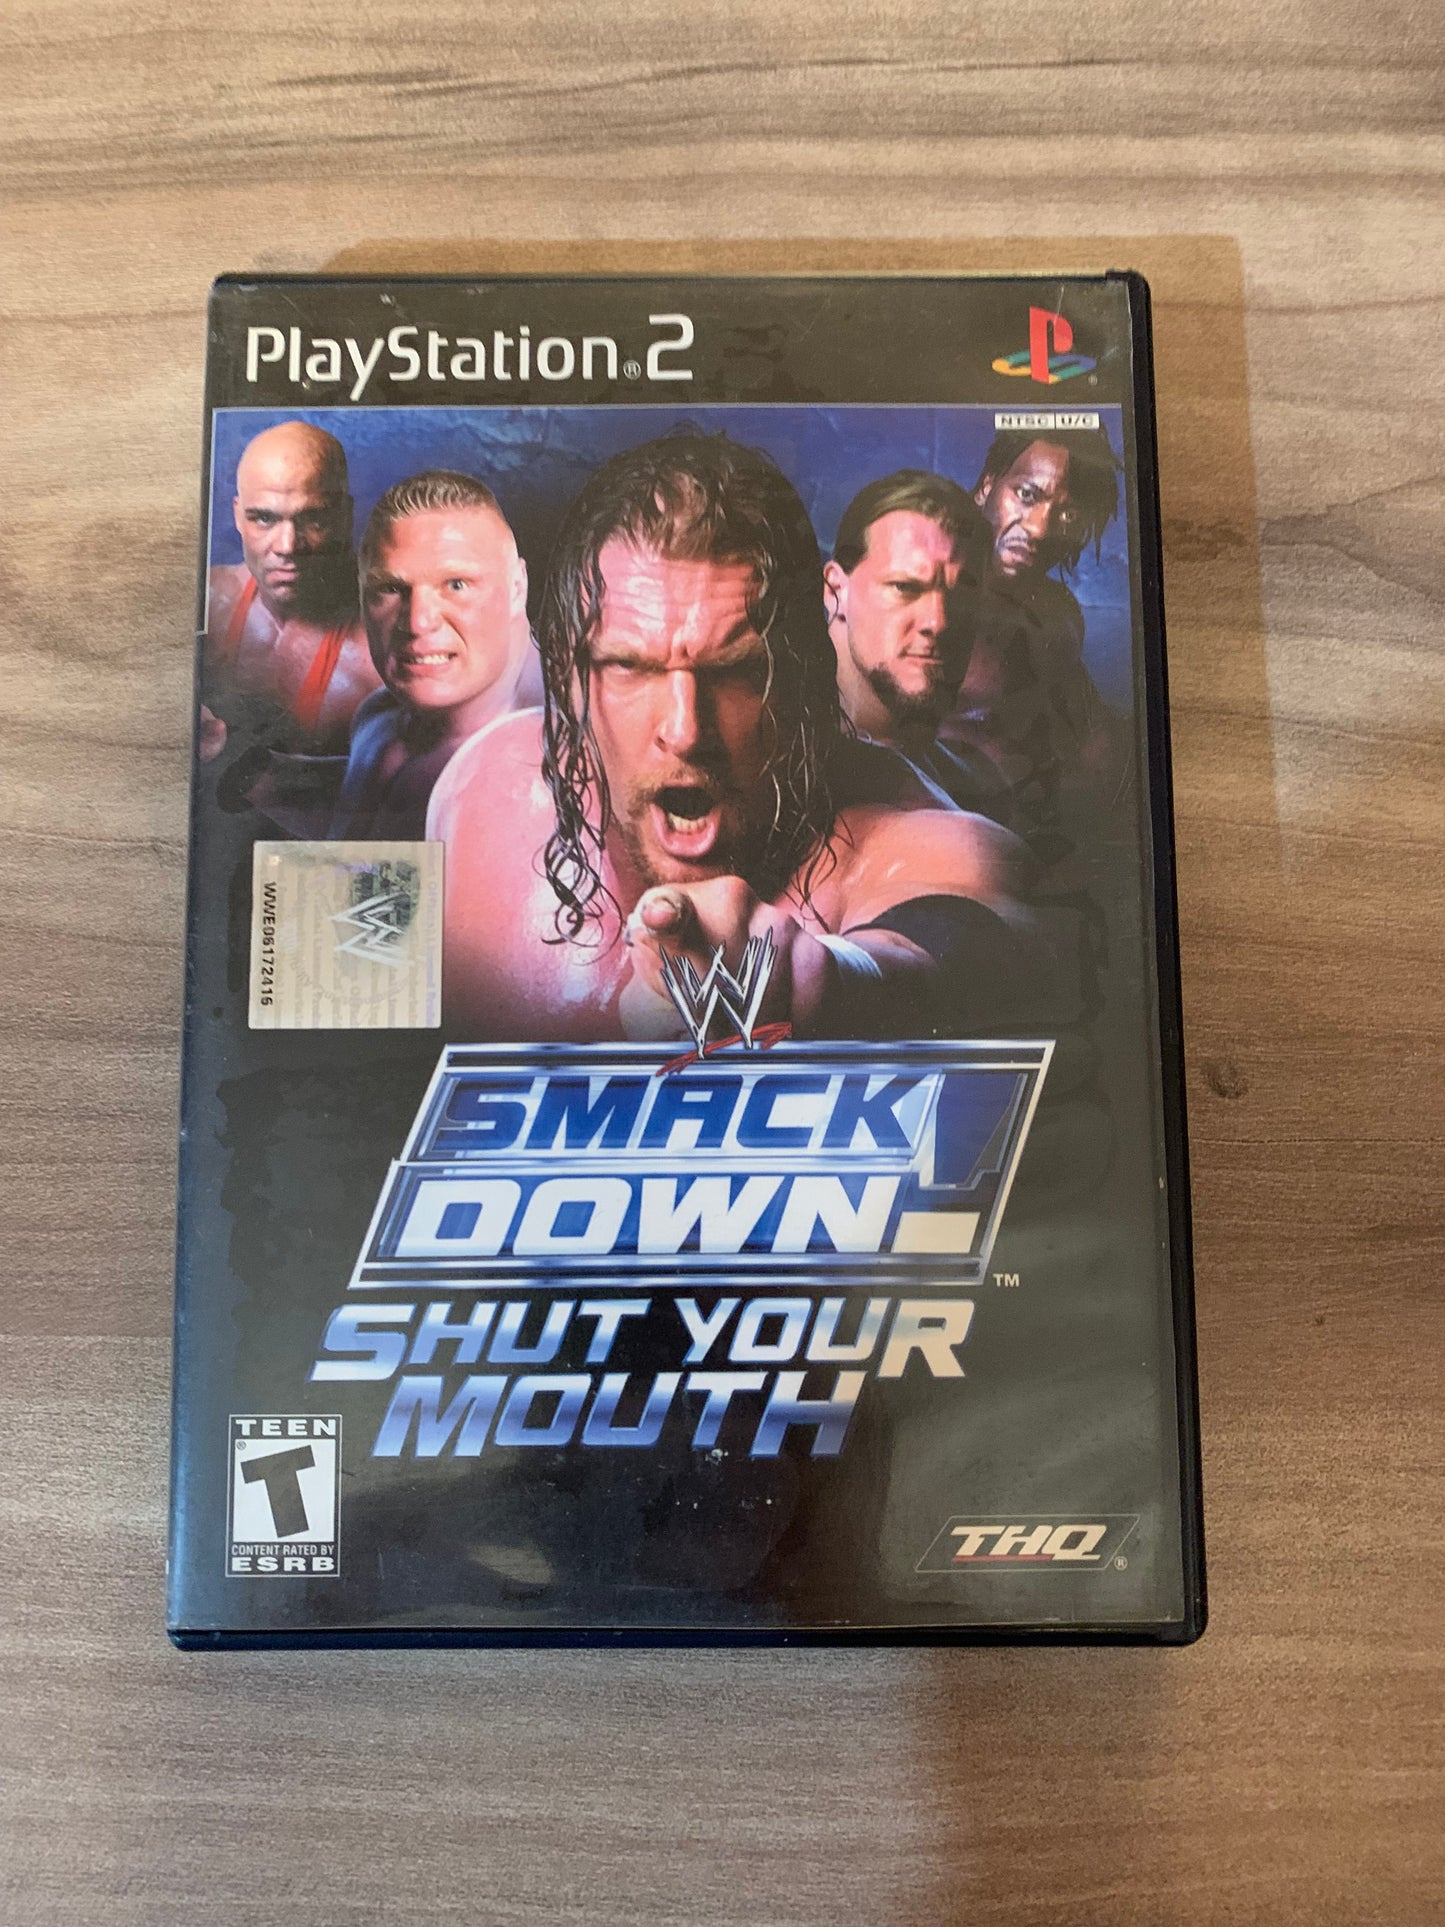 SONY PLAYSTATiON 2 [PS2] | WWE SMACKDOWN SHUT YOUR MOUTH